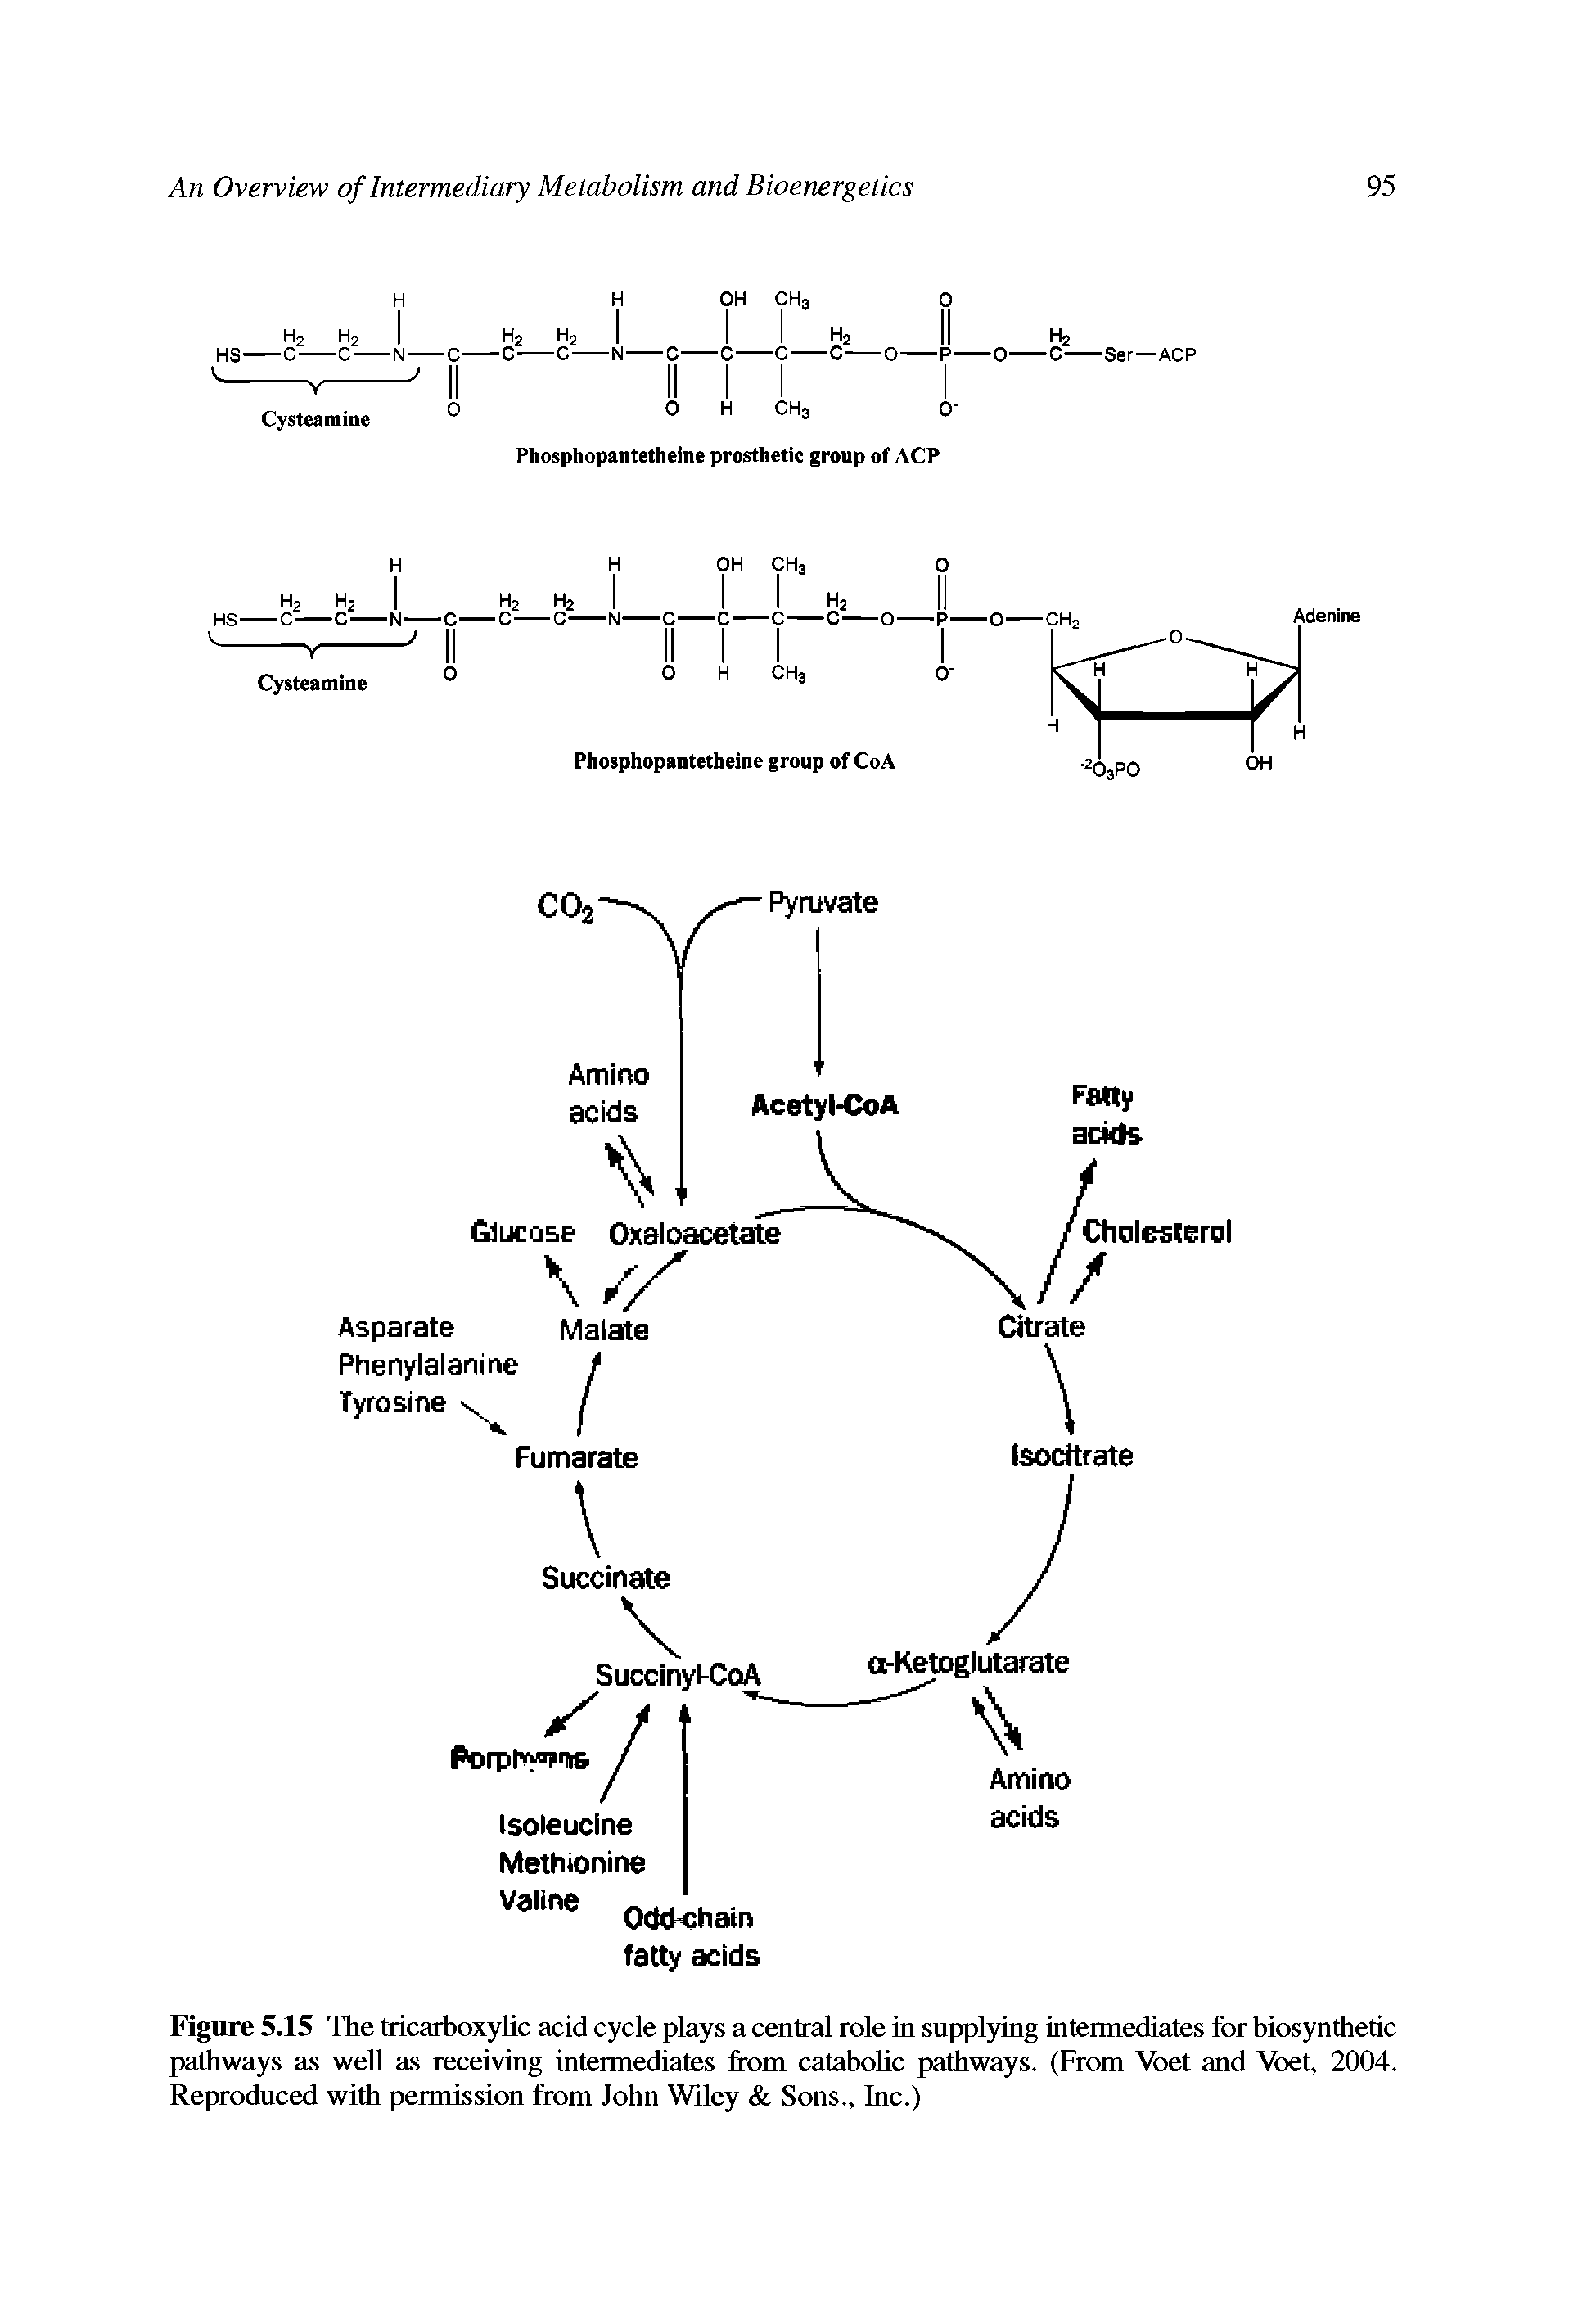 Figure 5.15 The tricarboxylic acid cycle plays a central role in supplying intermediates for biosynthetic pathways as well as receiving intermediates from catabolic pathways. (From Voet and Voet, 2004. Reproduced with permission from John Wiley Sons., Inc.)...